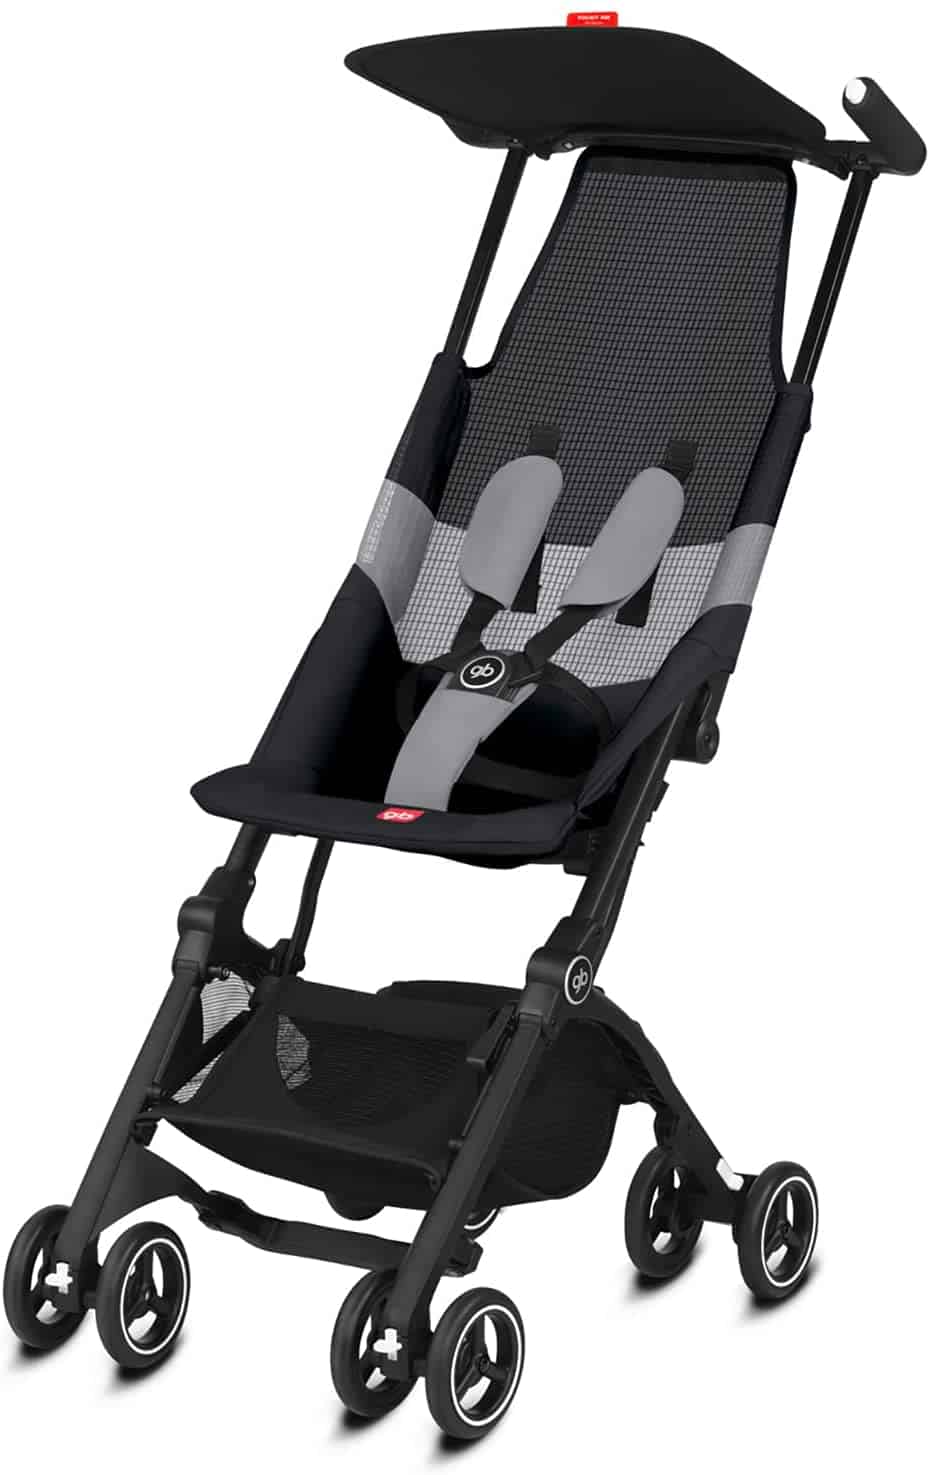 Most Light & Compact Travel Buggy - GB Pockit Air